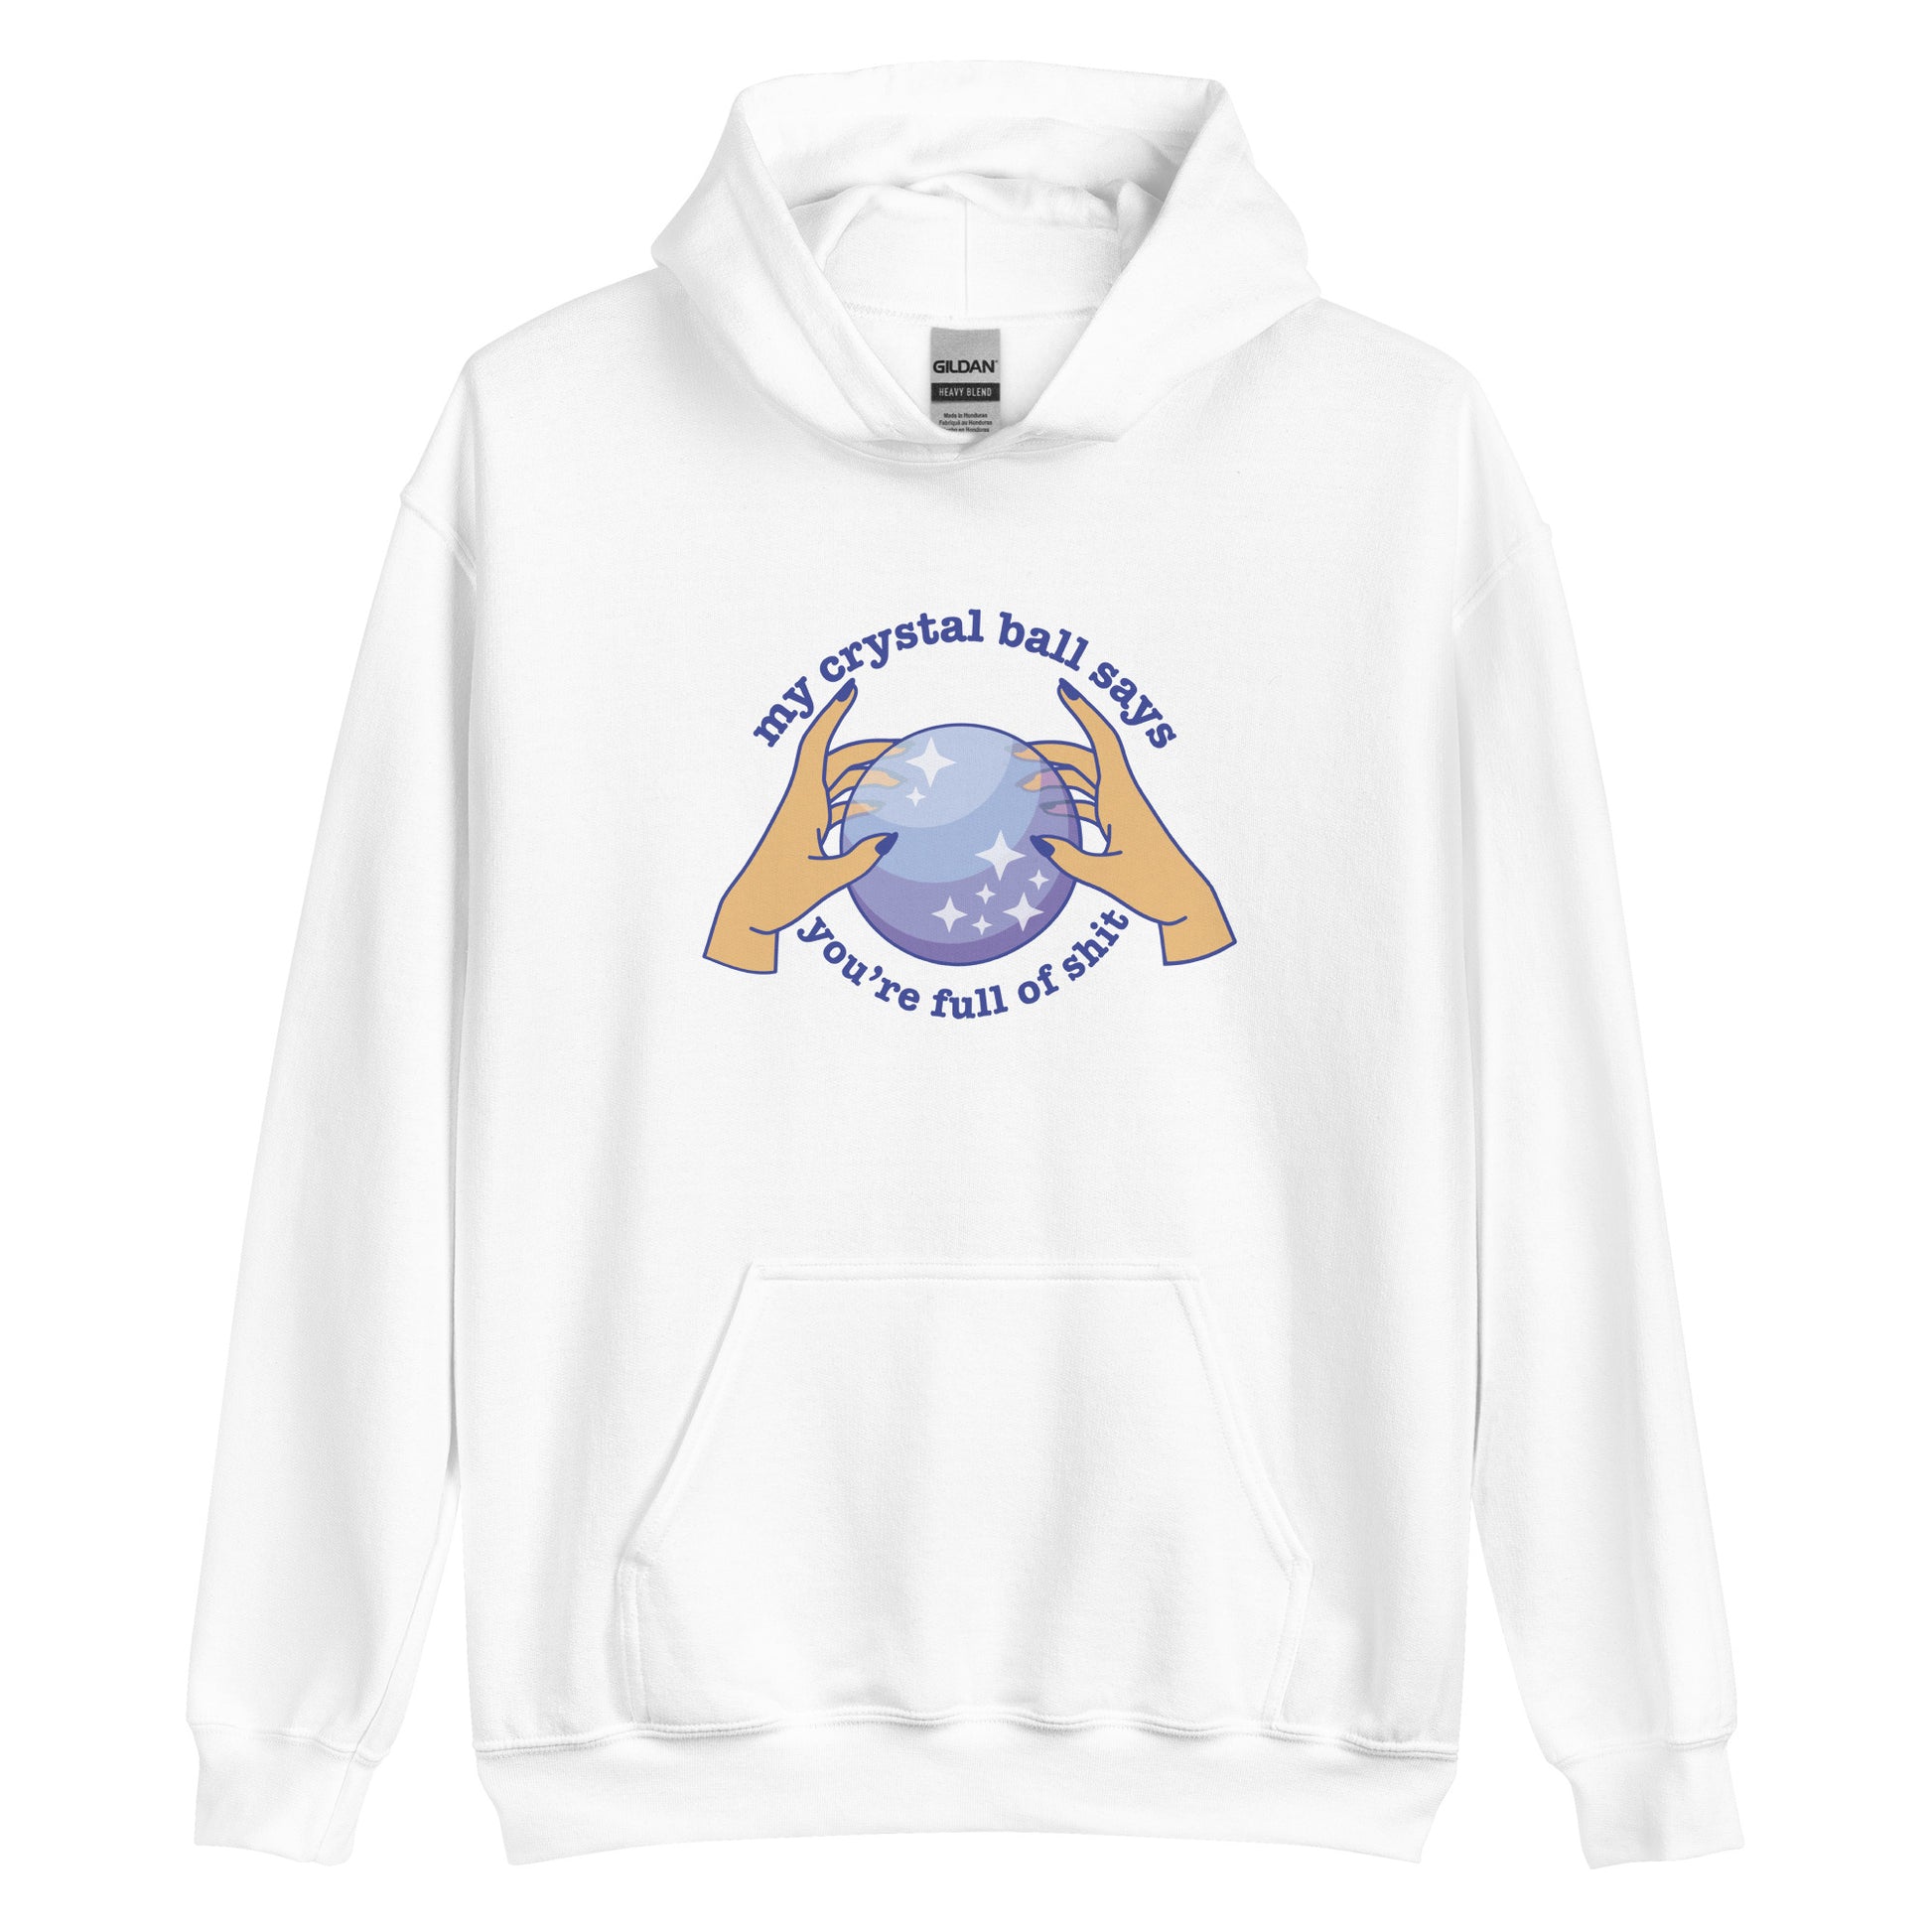 A white hoodie with a picture of hands on a crystal ball and text reading "My crystal ball says you're full of shit"